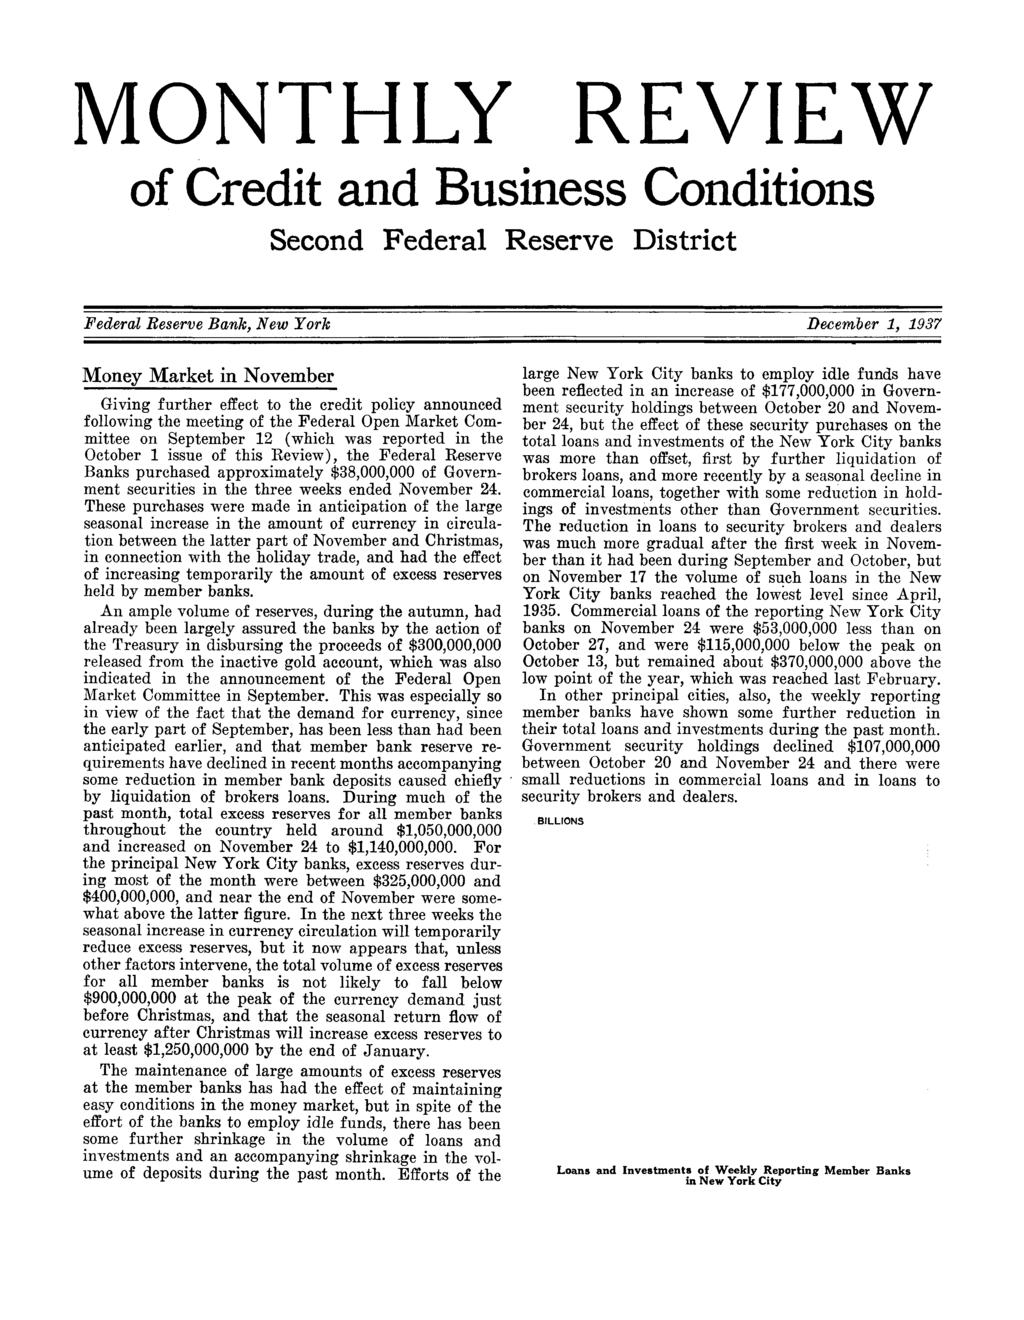 MONTHLY REVIEW of Credit and Business Conditions S e c o n d F e d e r a l R e s e r v e D i s t r i c t F ed eral R eserve B ank, N ew Y ork D ecem ber 1, 1937 M o n e y M a r k e t i n N o v e m b